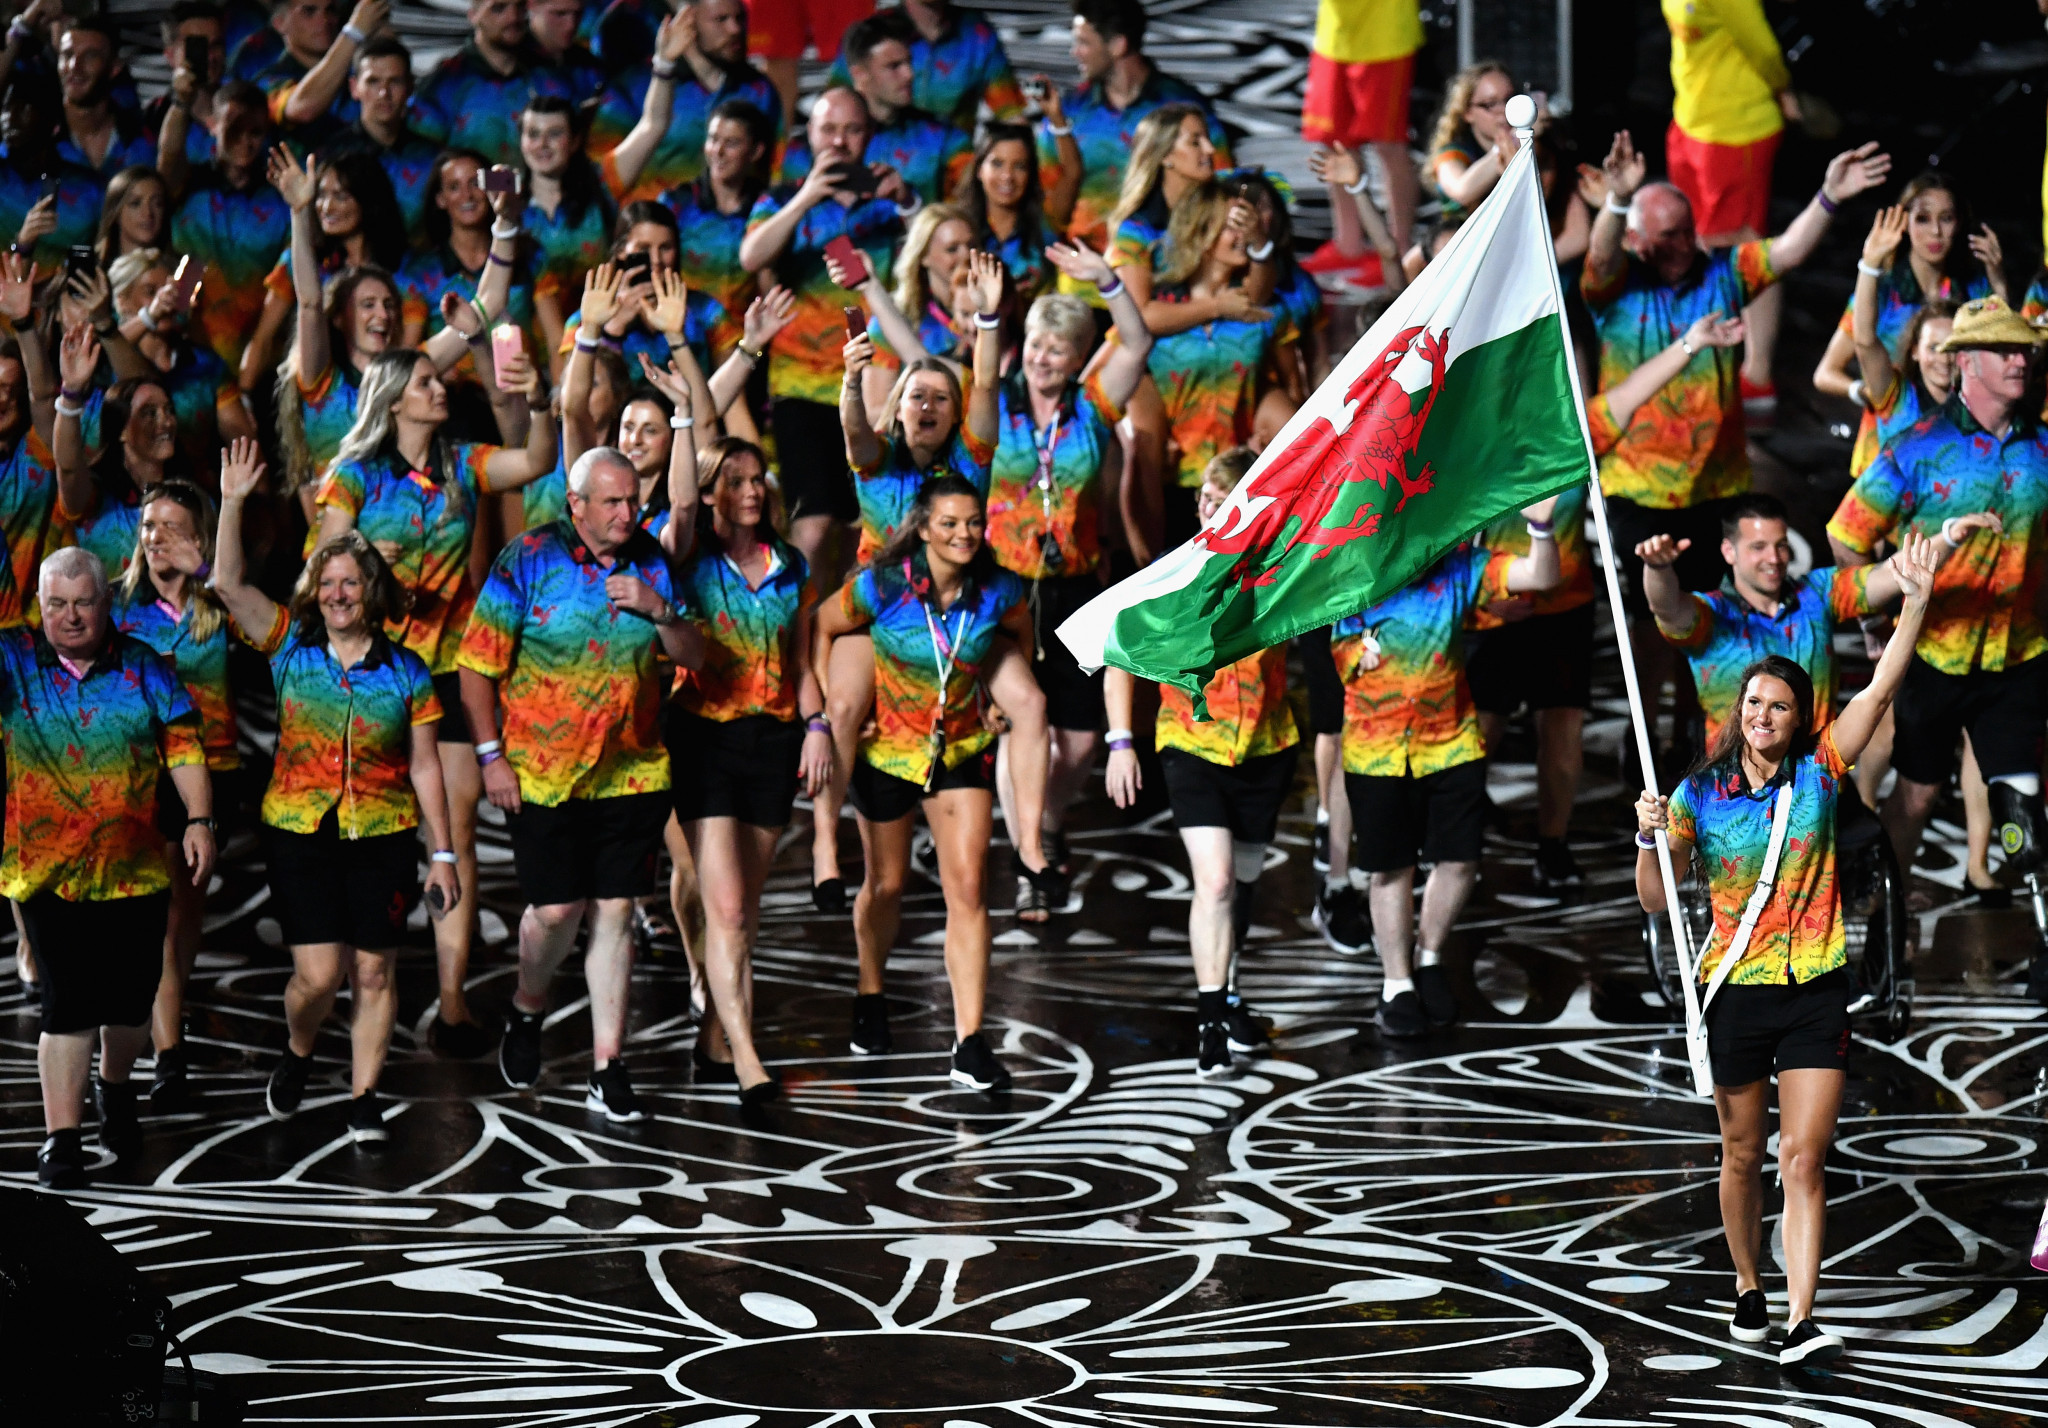 Wales' most successful Commonwealth Games was at Gold Coast 2018 ©Getty Images